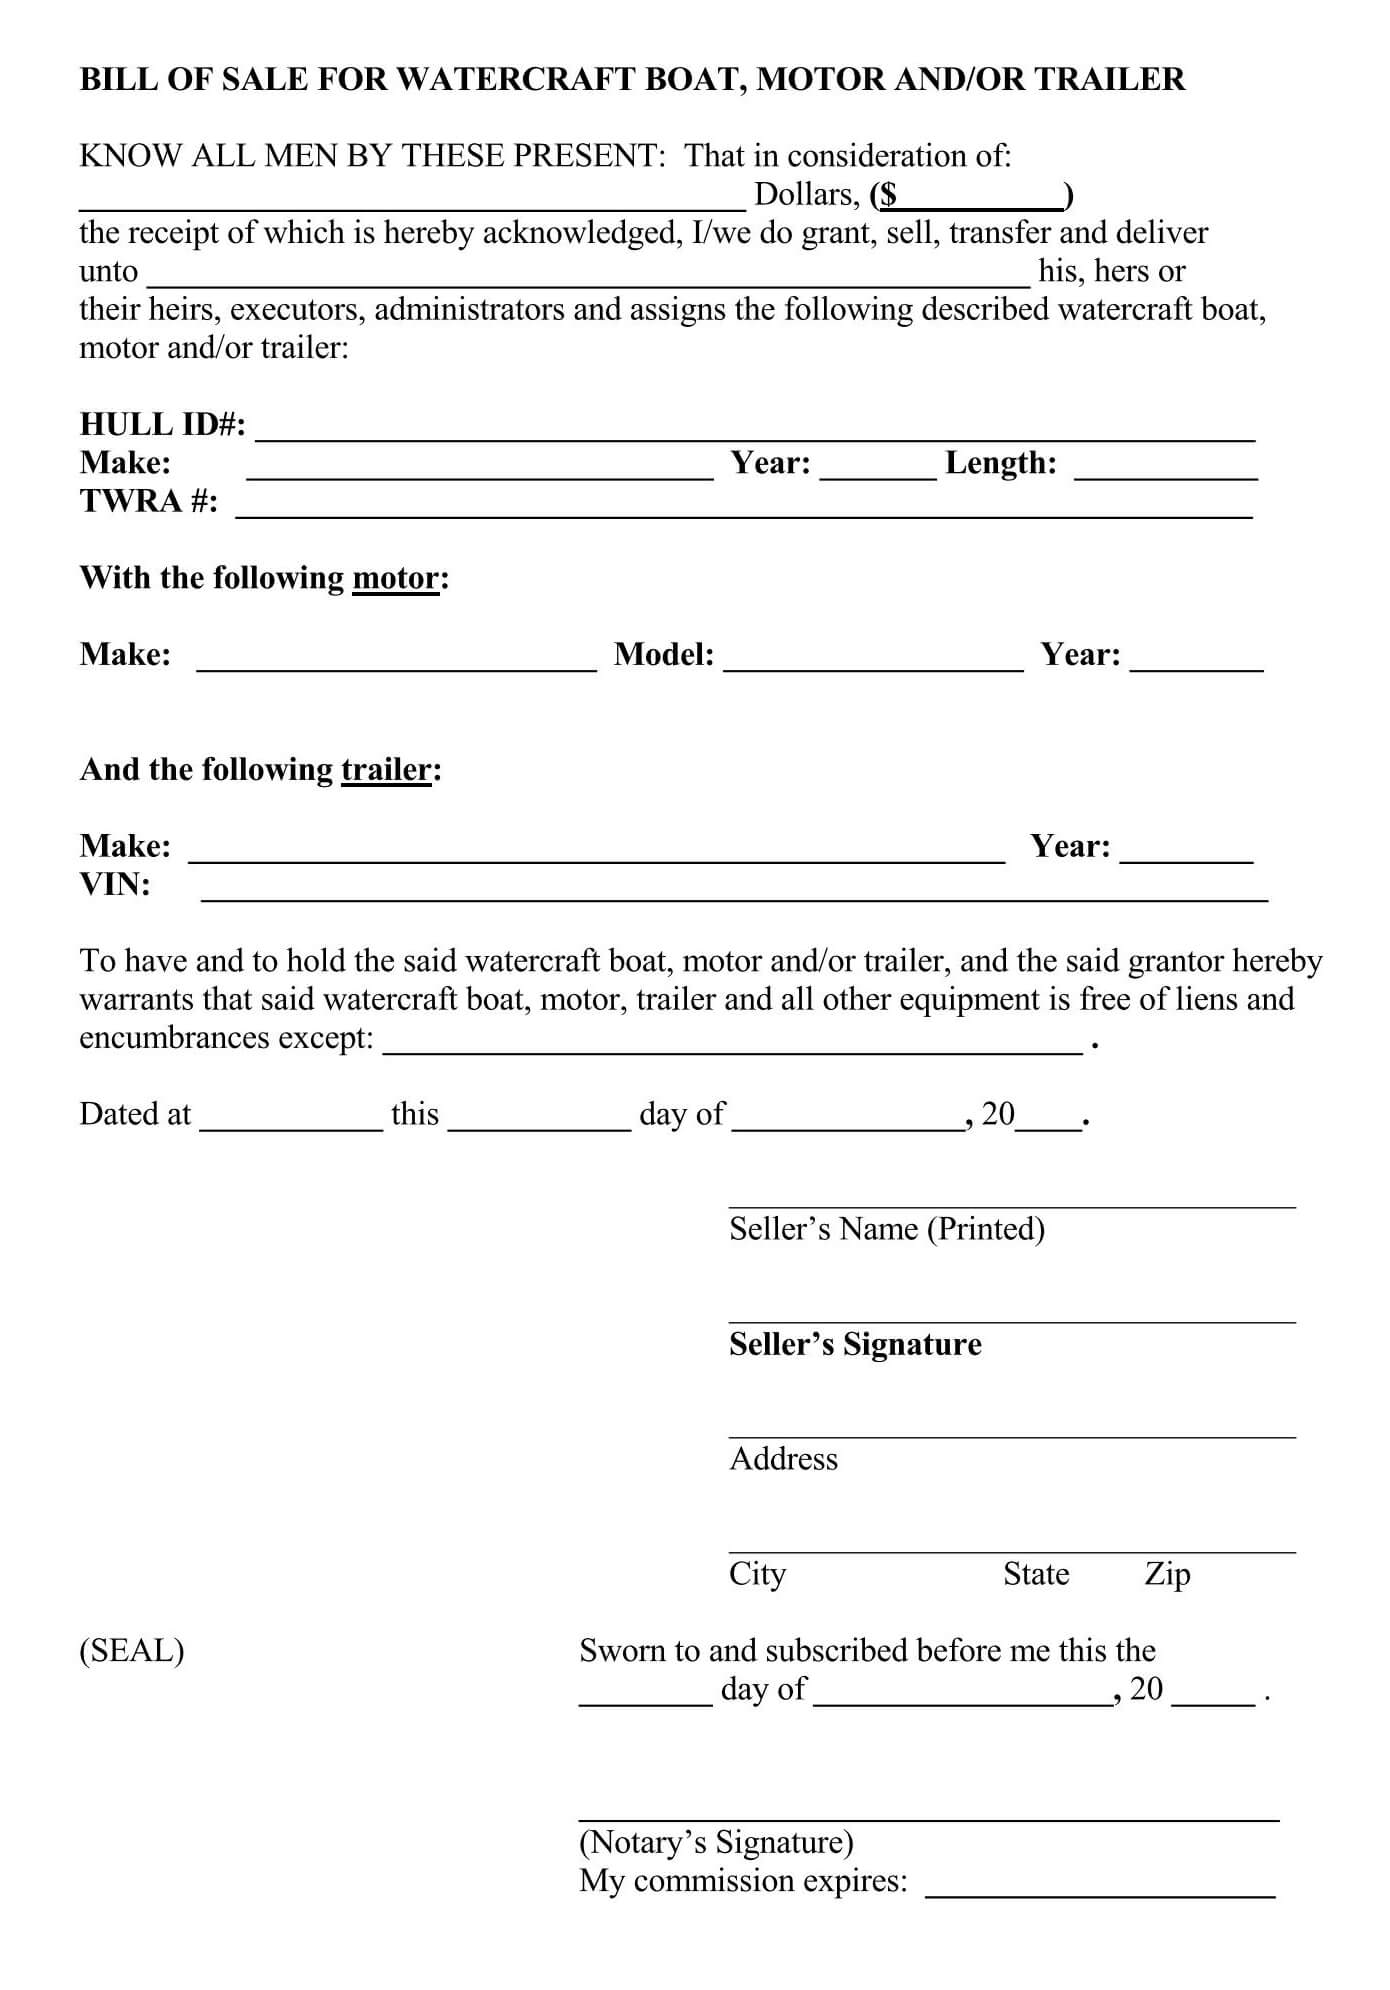 Trailer Bill of Sale Form - Fillable Word Document 12